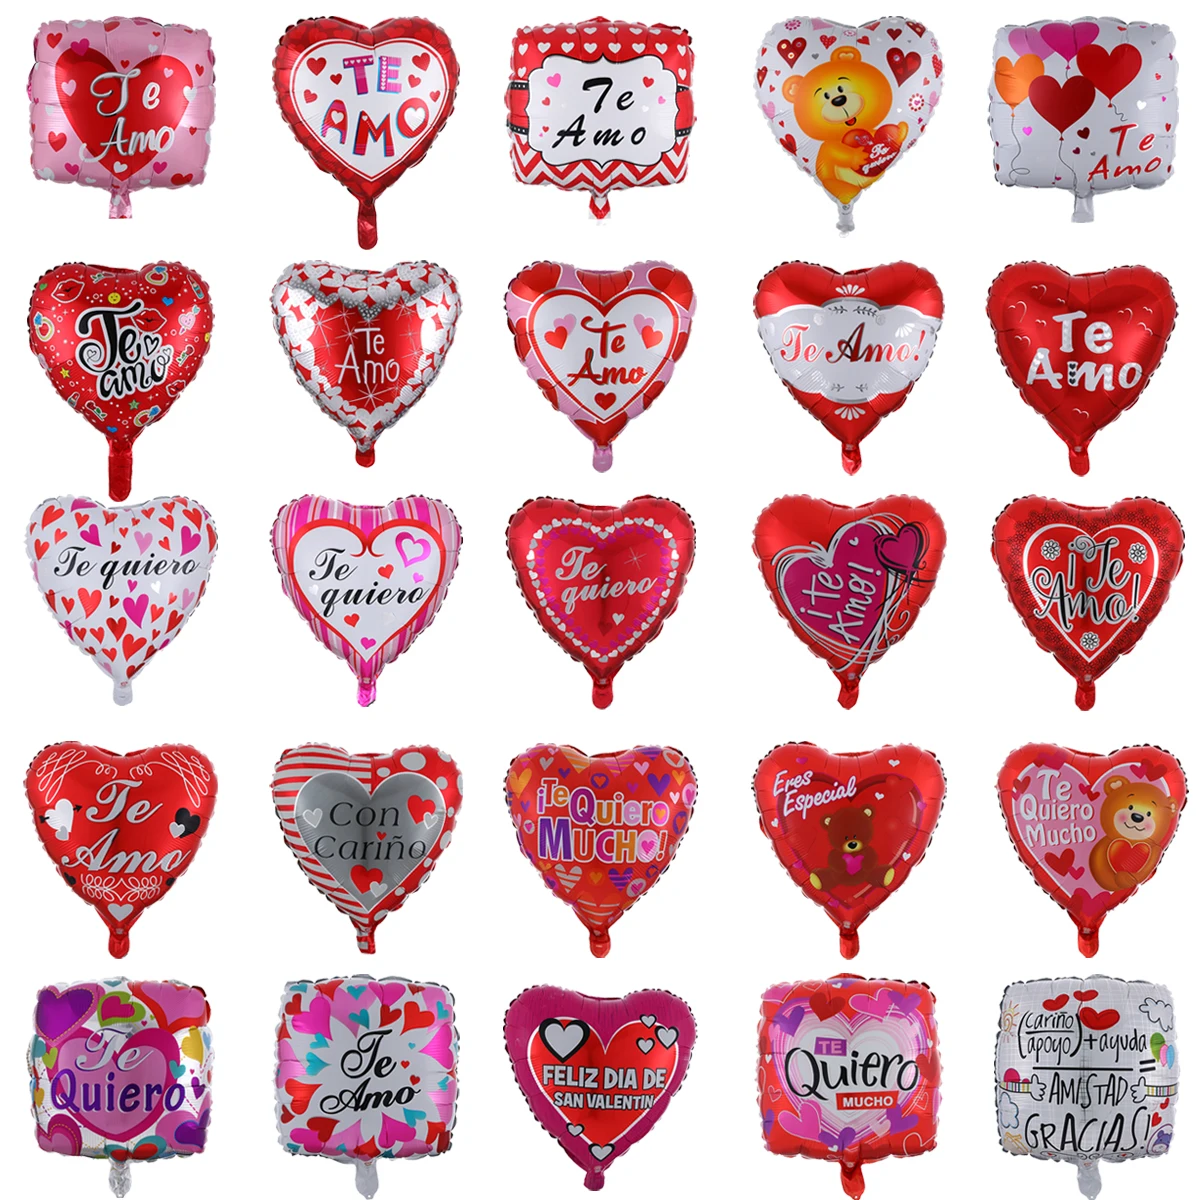 

10pcs 18inch Printed Spanish Foil Balloons Heart Shape Love Globos Valentines Days Gifts Helium Engagement Wedding Party Decor